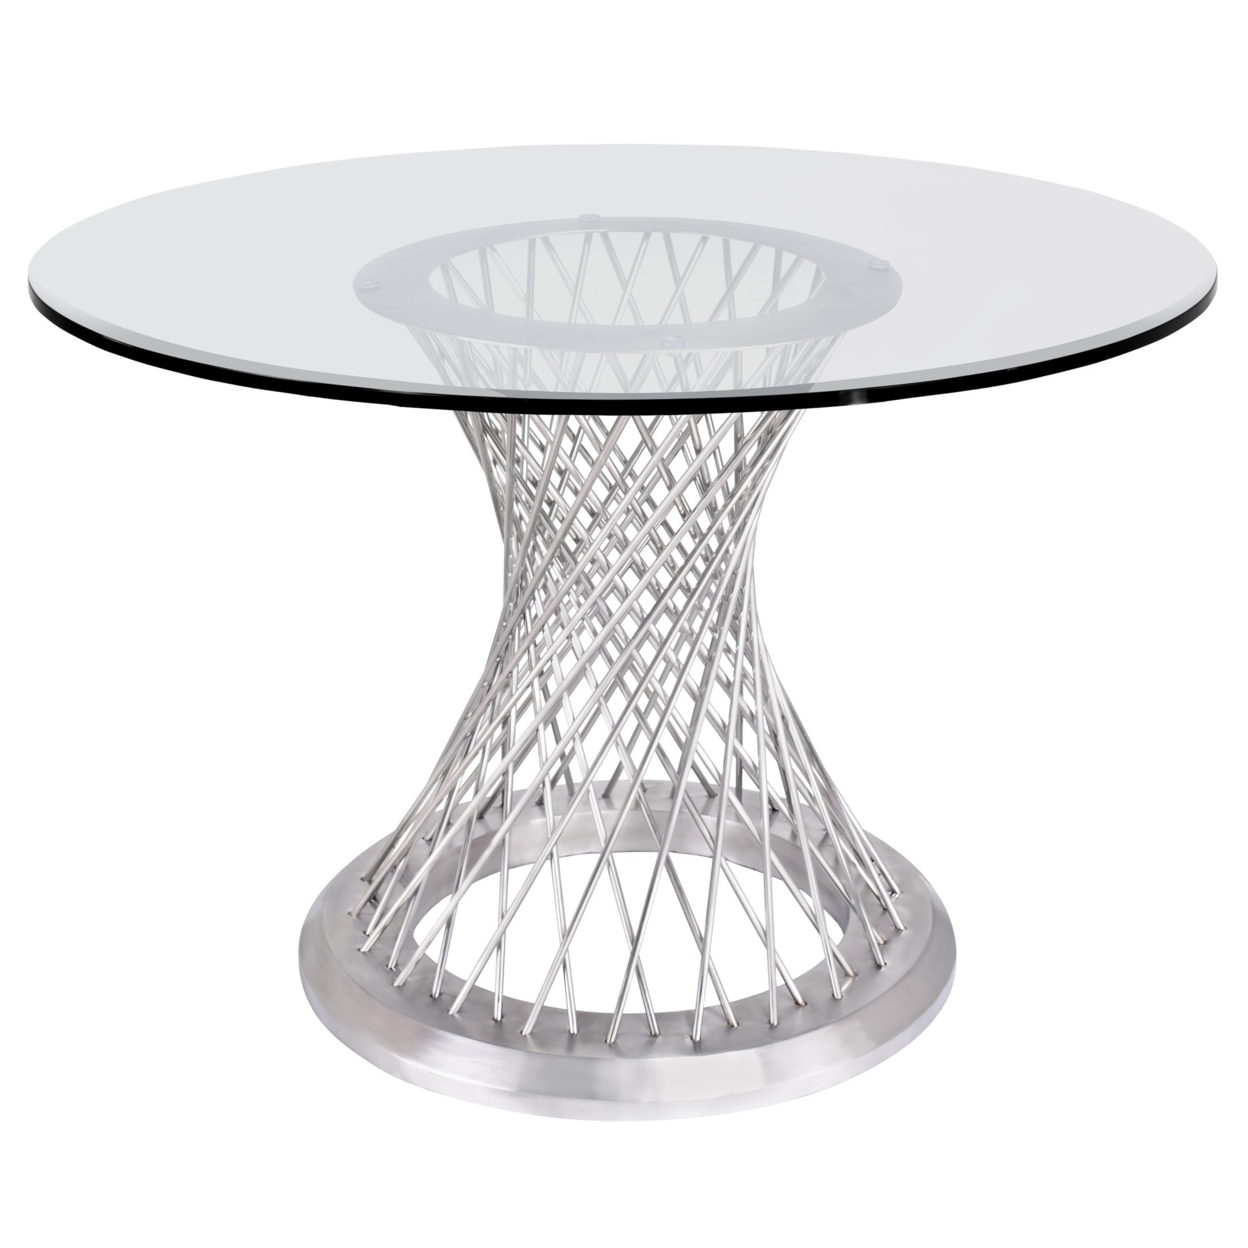 Round Glass Top Dining Table With Metal Mesh Base, Silver- Saltoro Sherpi